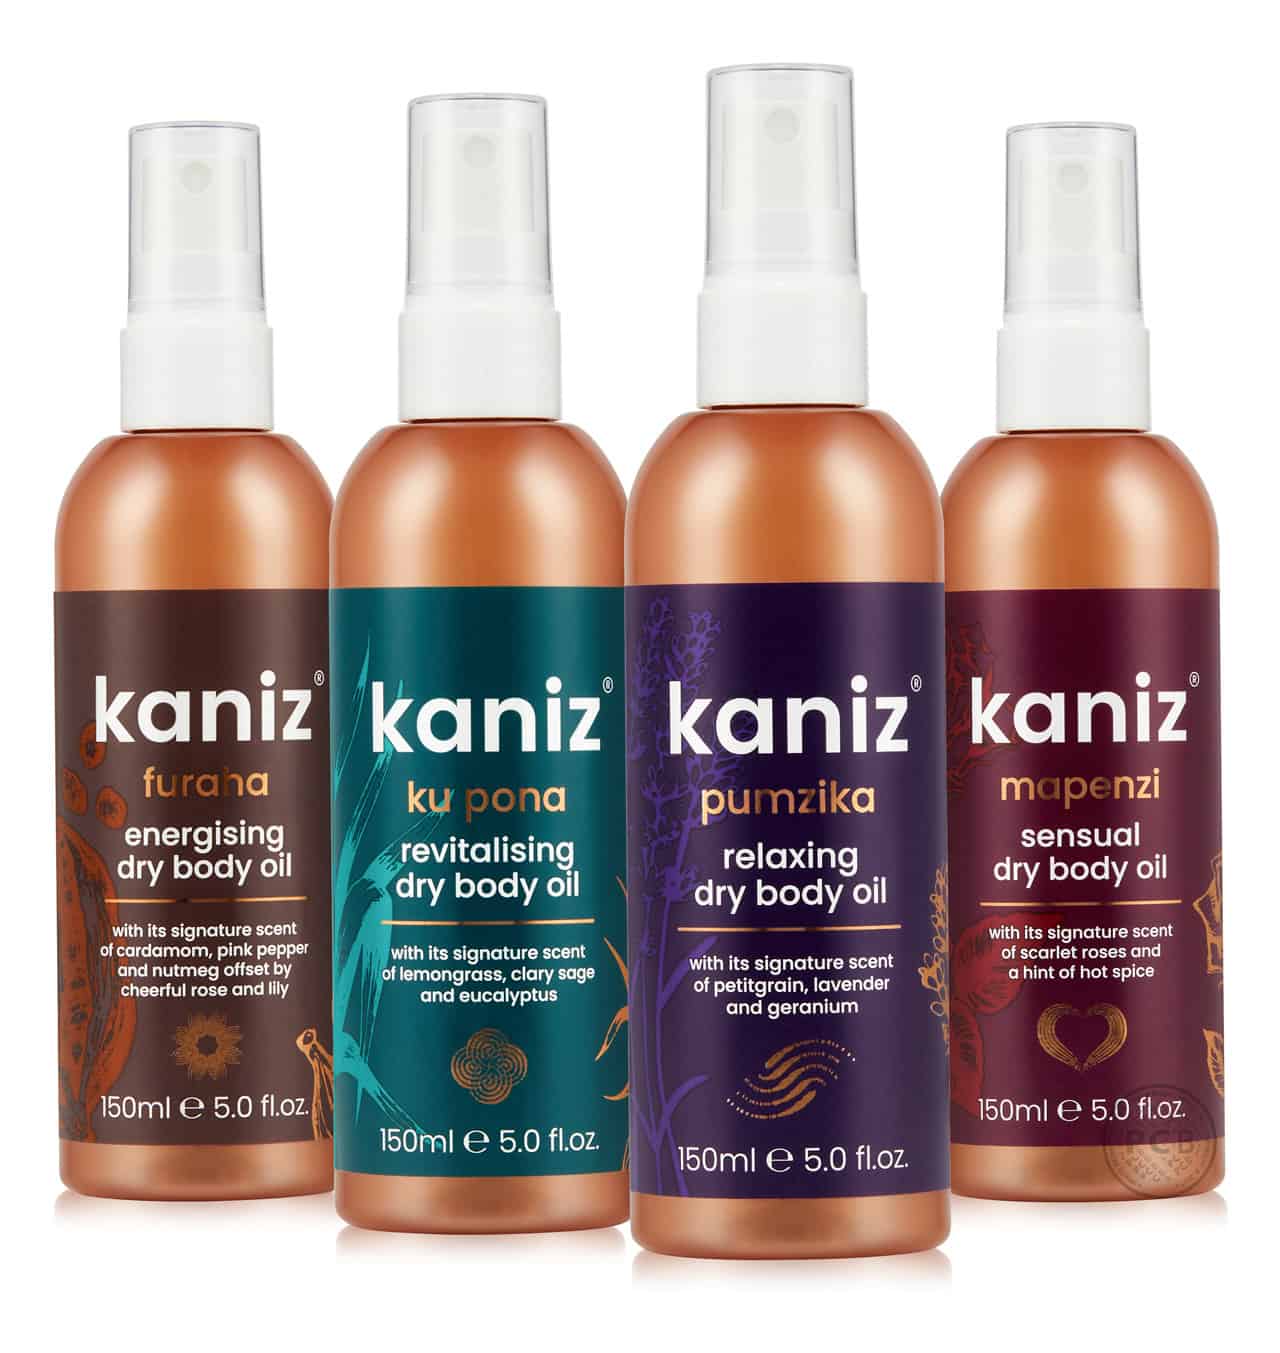 Image of four dry body oil products for Kaniz brand.